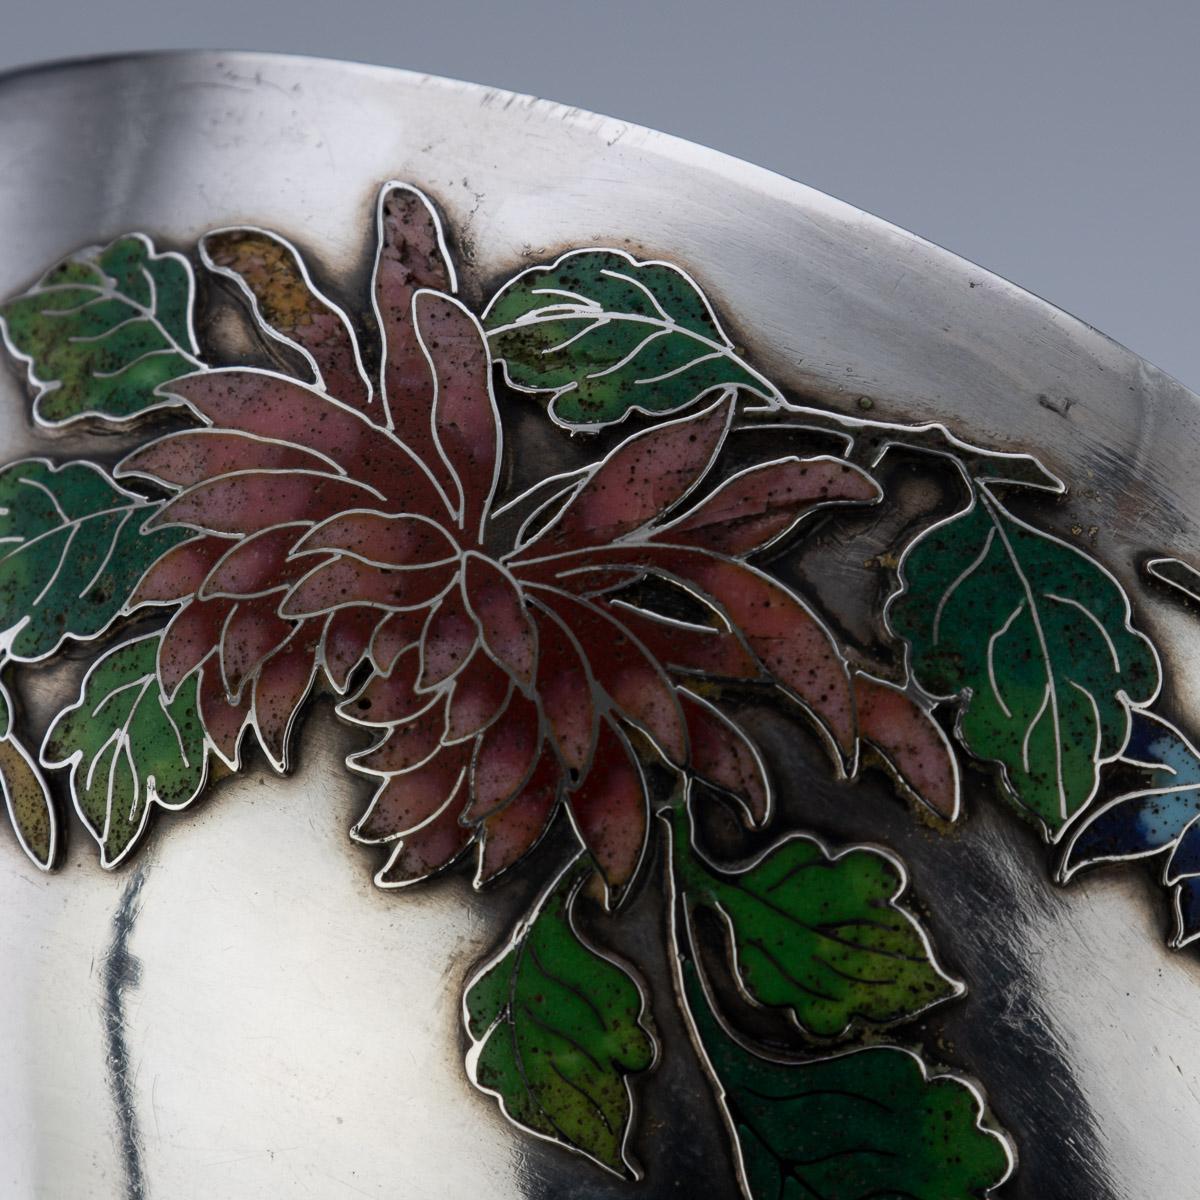 19th Century Rare Chinese Export Solid Silver & Enamel Bowl, Wang Hing, c.1890 For Sale 15